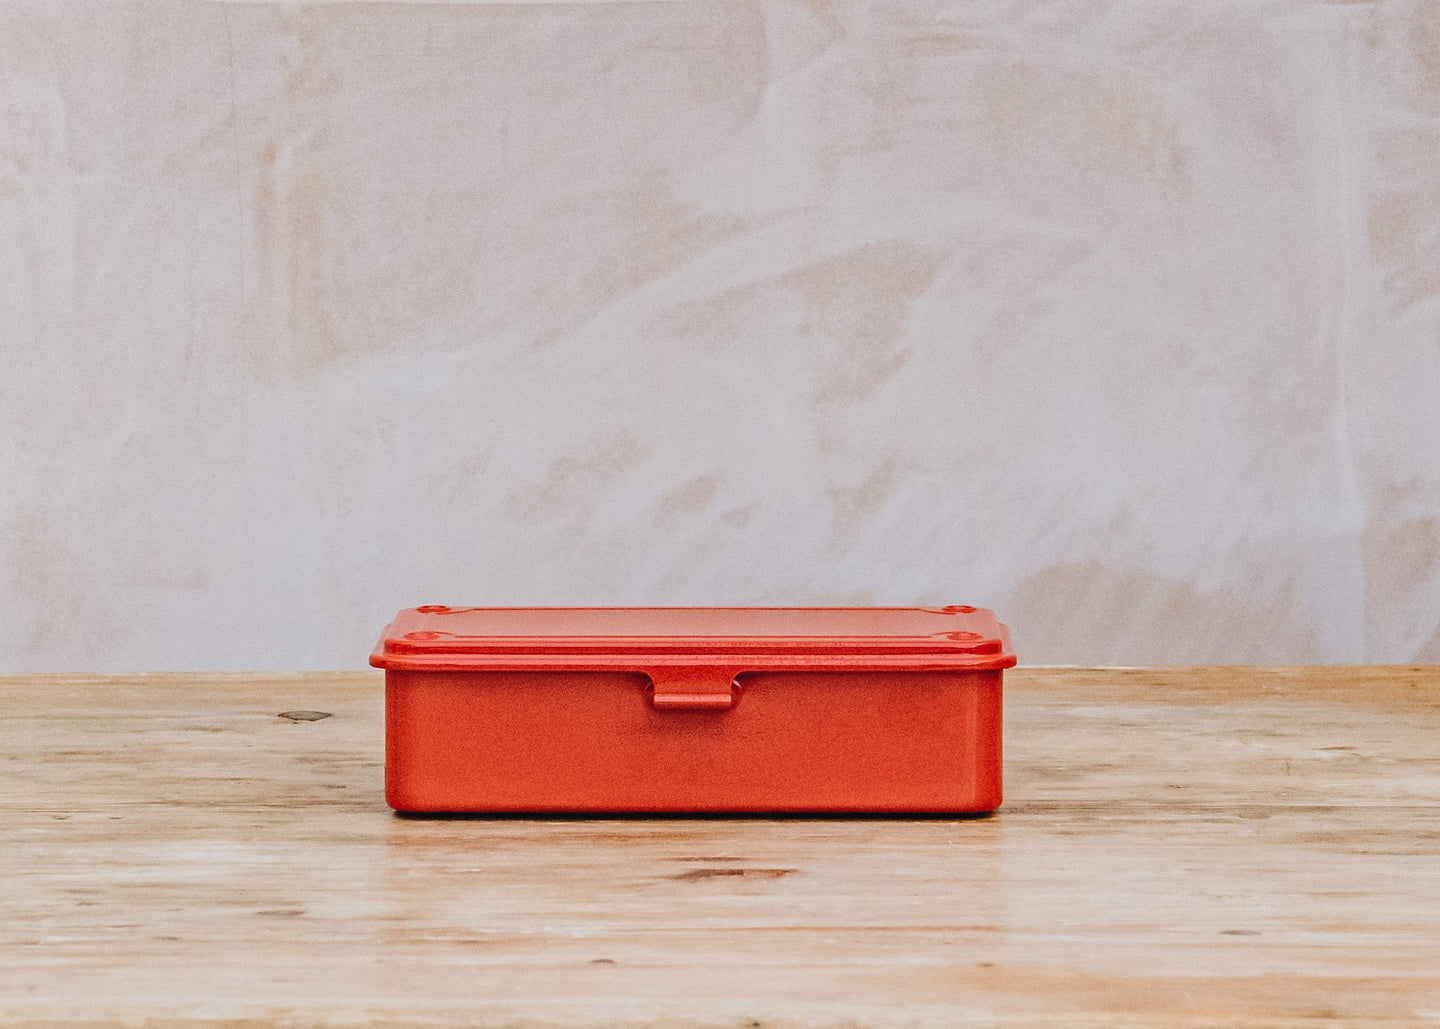 Trunk Shape Tool Box with Catch in Red